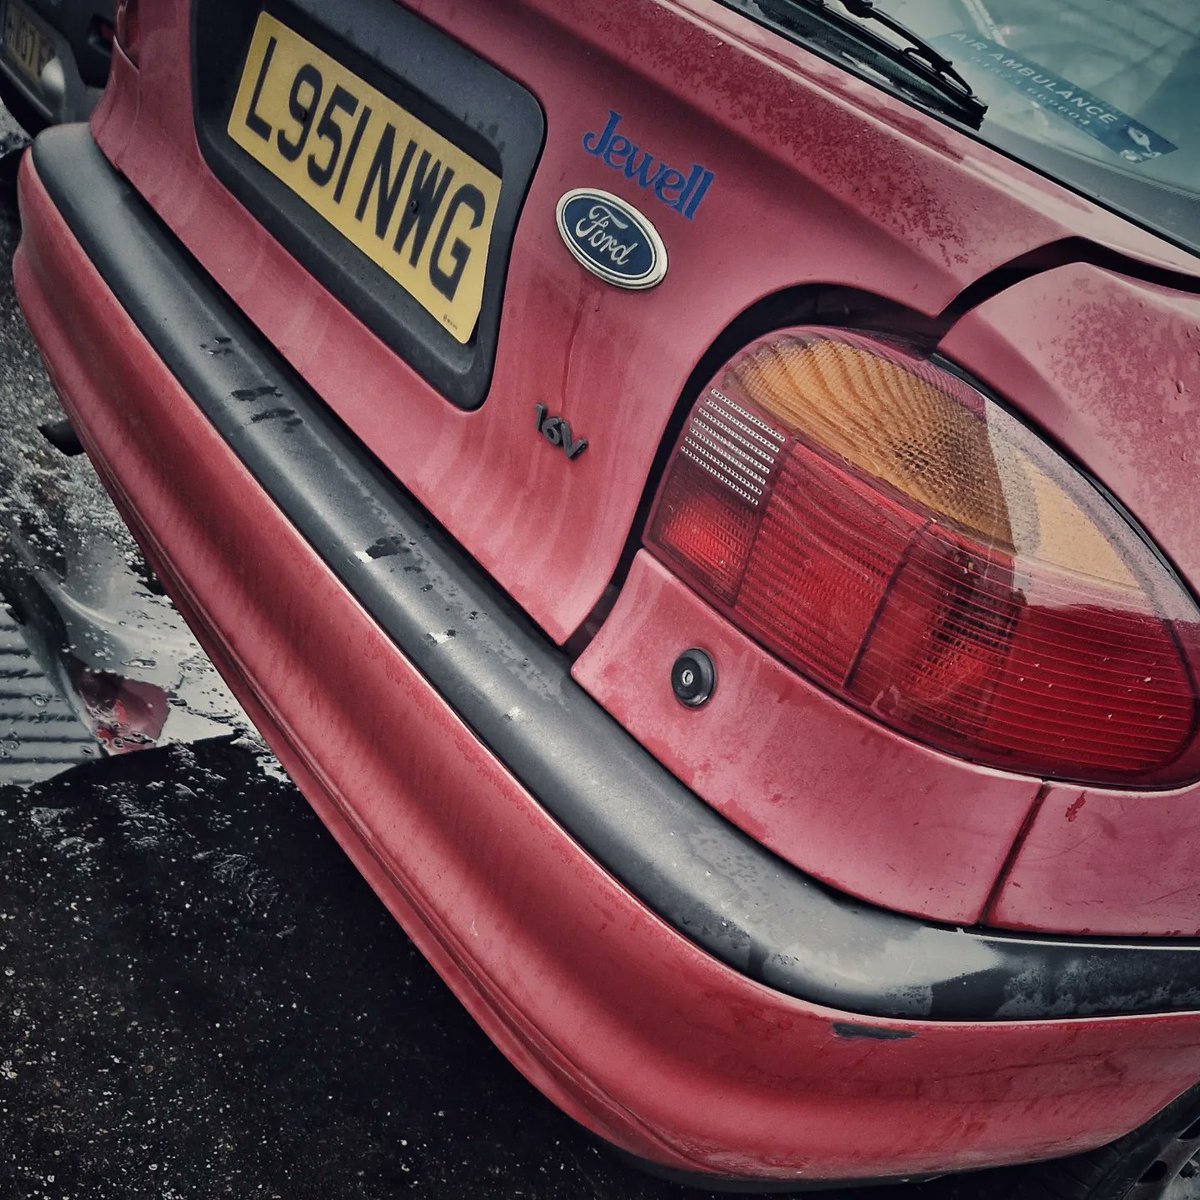 SCRAP CAR OF THE DAY.......goes to this 1994 Mk1 Ford Mondeo 1.8 LX, still mot'ed until October and 130k on the clock #scrapcargarage #scrapcaroftheday #modernclassics #scrapyard #retrorides #fordmondeo #classicford #fordperformance